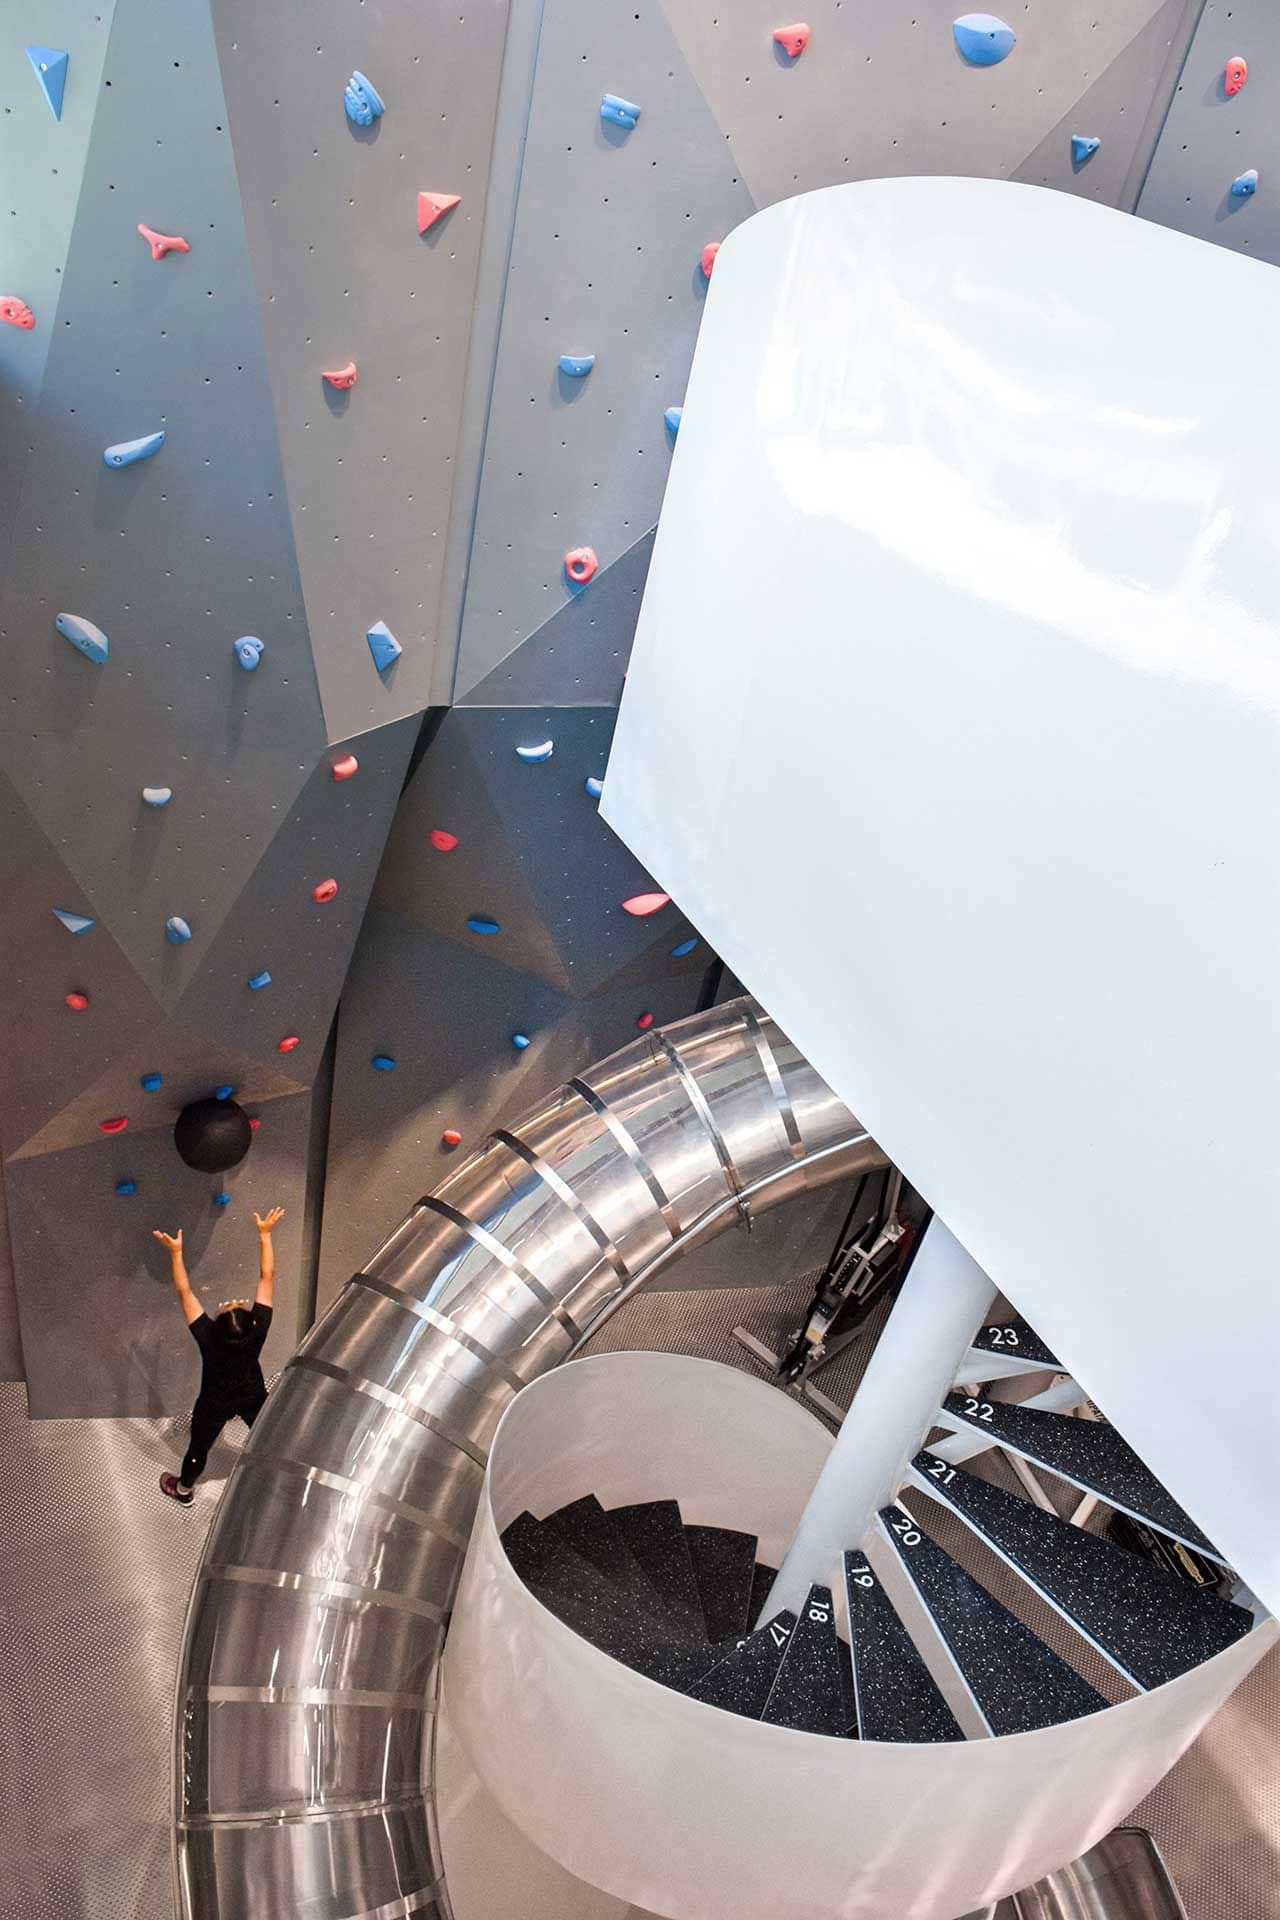 A large climbing wall sits right next to MFIT SPACE 01's spiraling metallic slide.